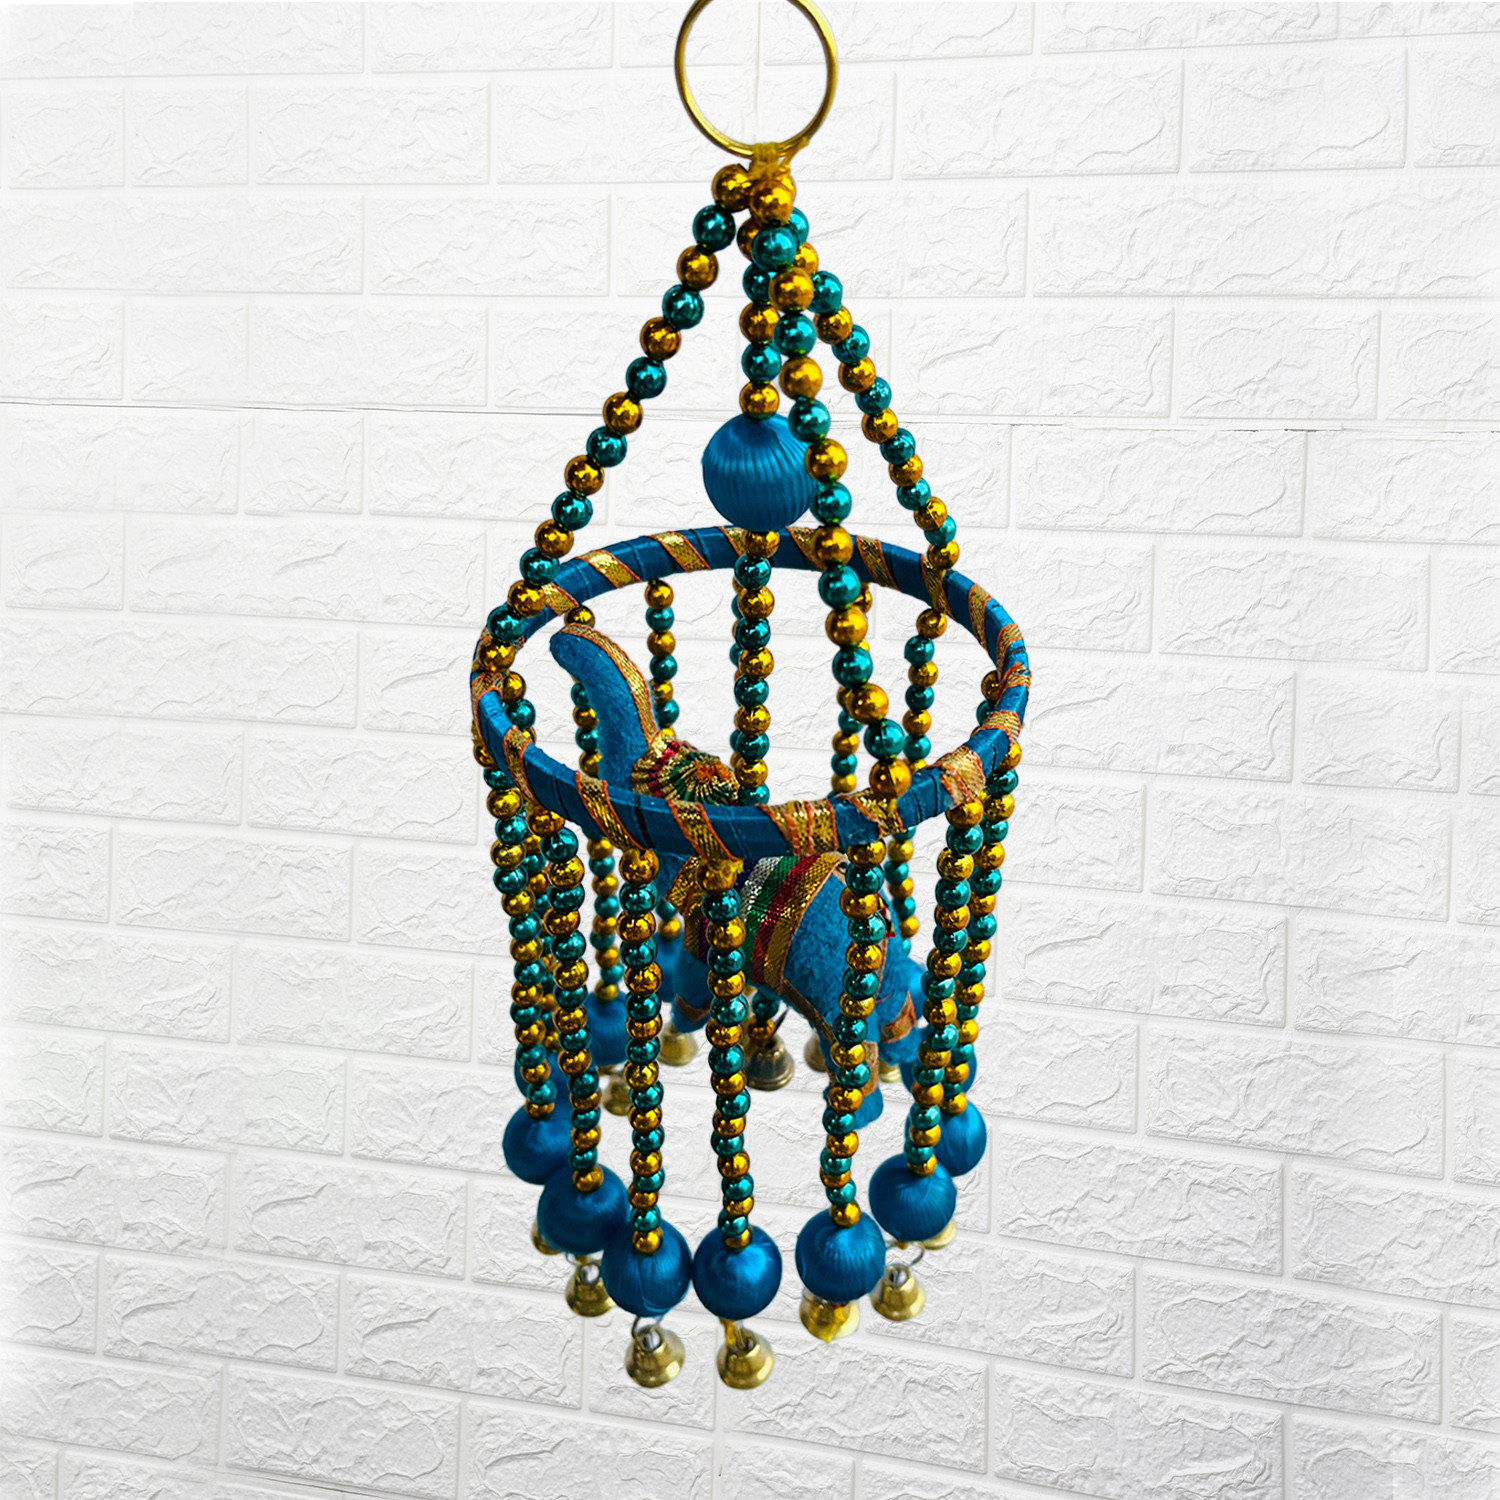 Kuber Industries Rajasthani Traditional Windchimes|1 Ring Elephant Jhumar with Bells|Polyester Handcrafted Latkan|Decorative Door Hanging Latkan (Multicolor)